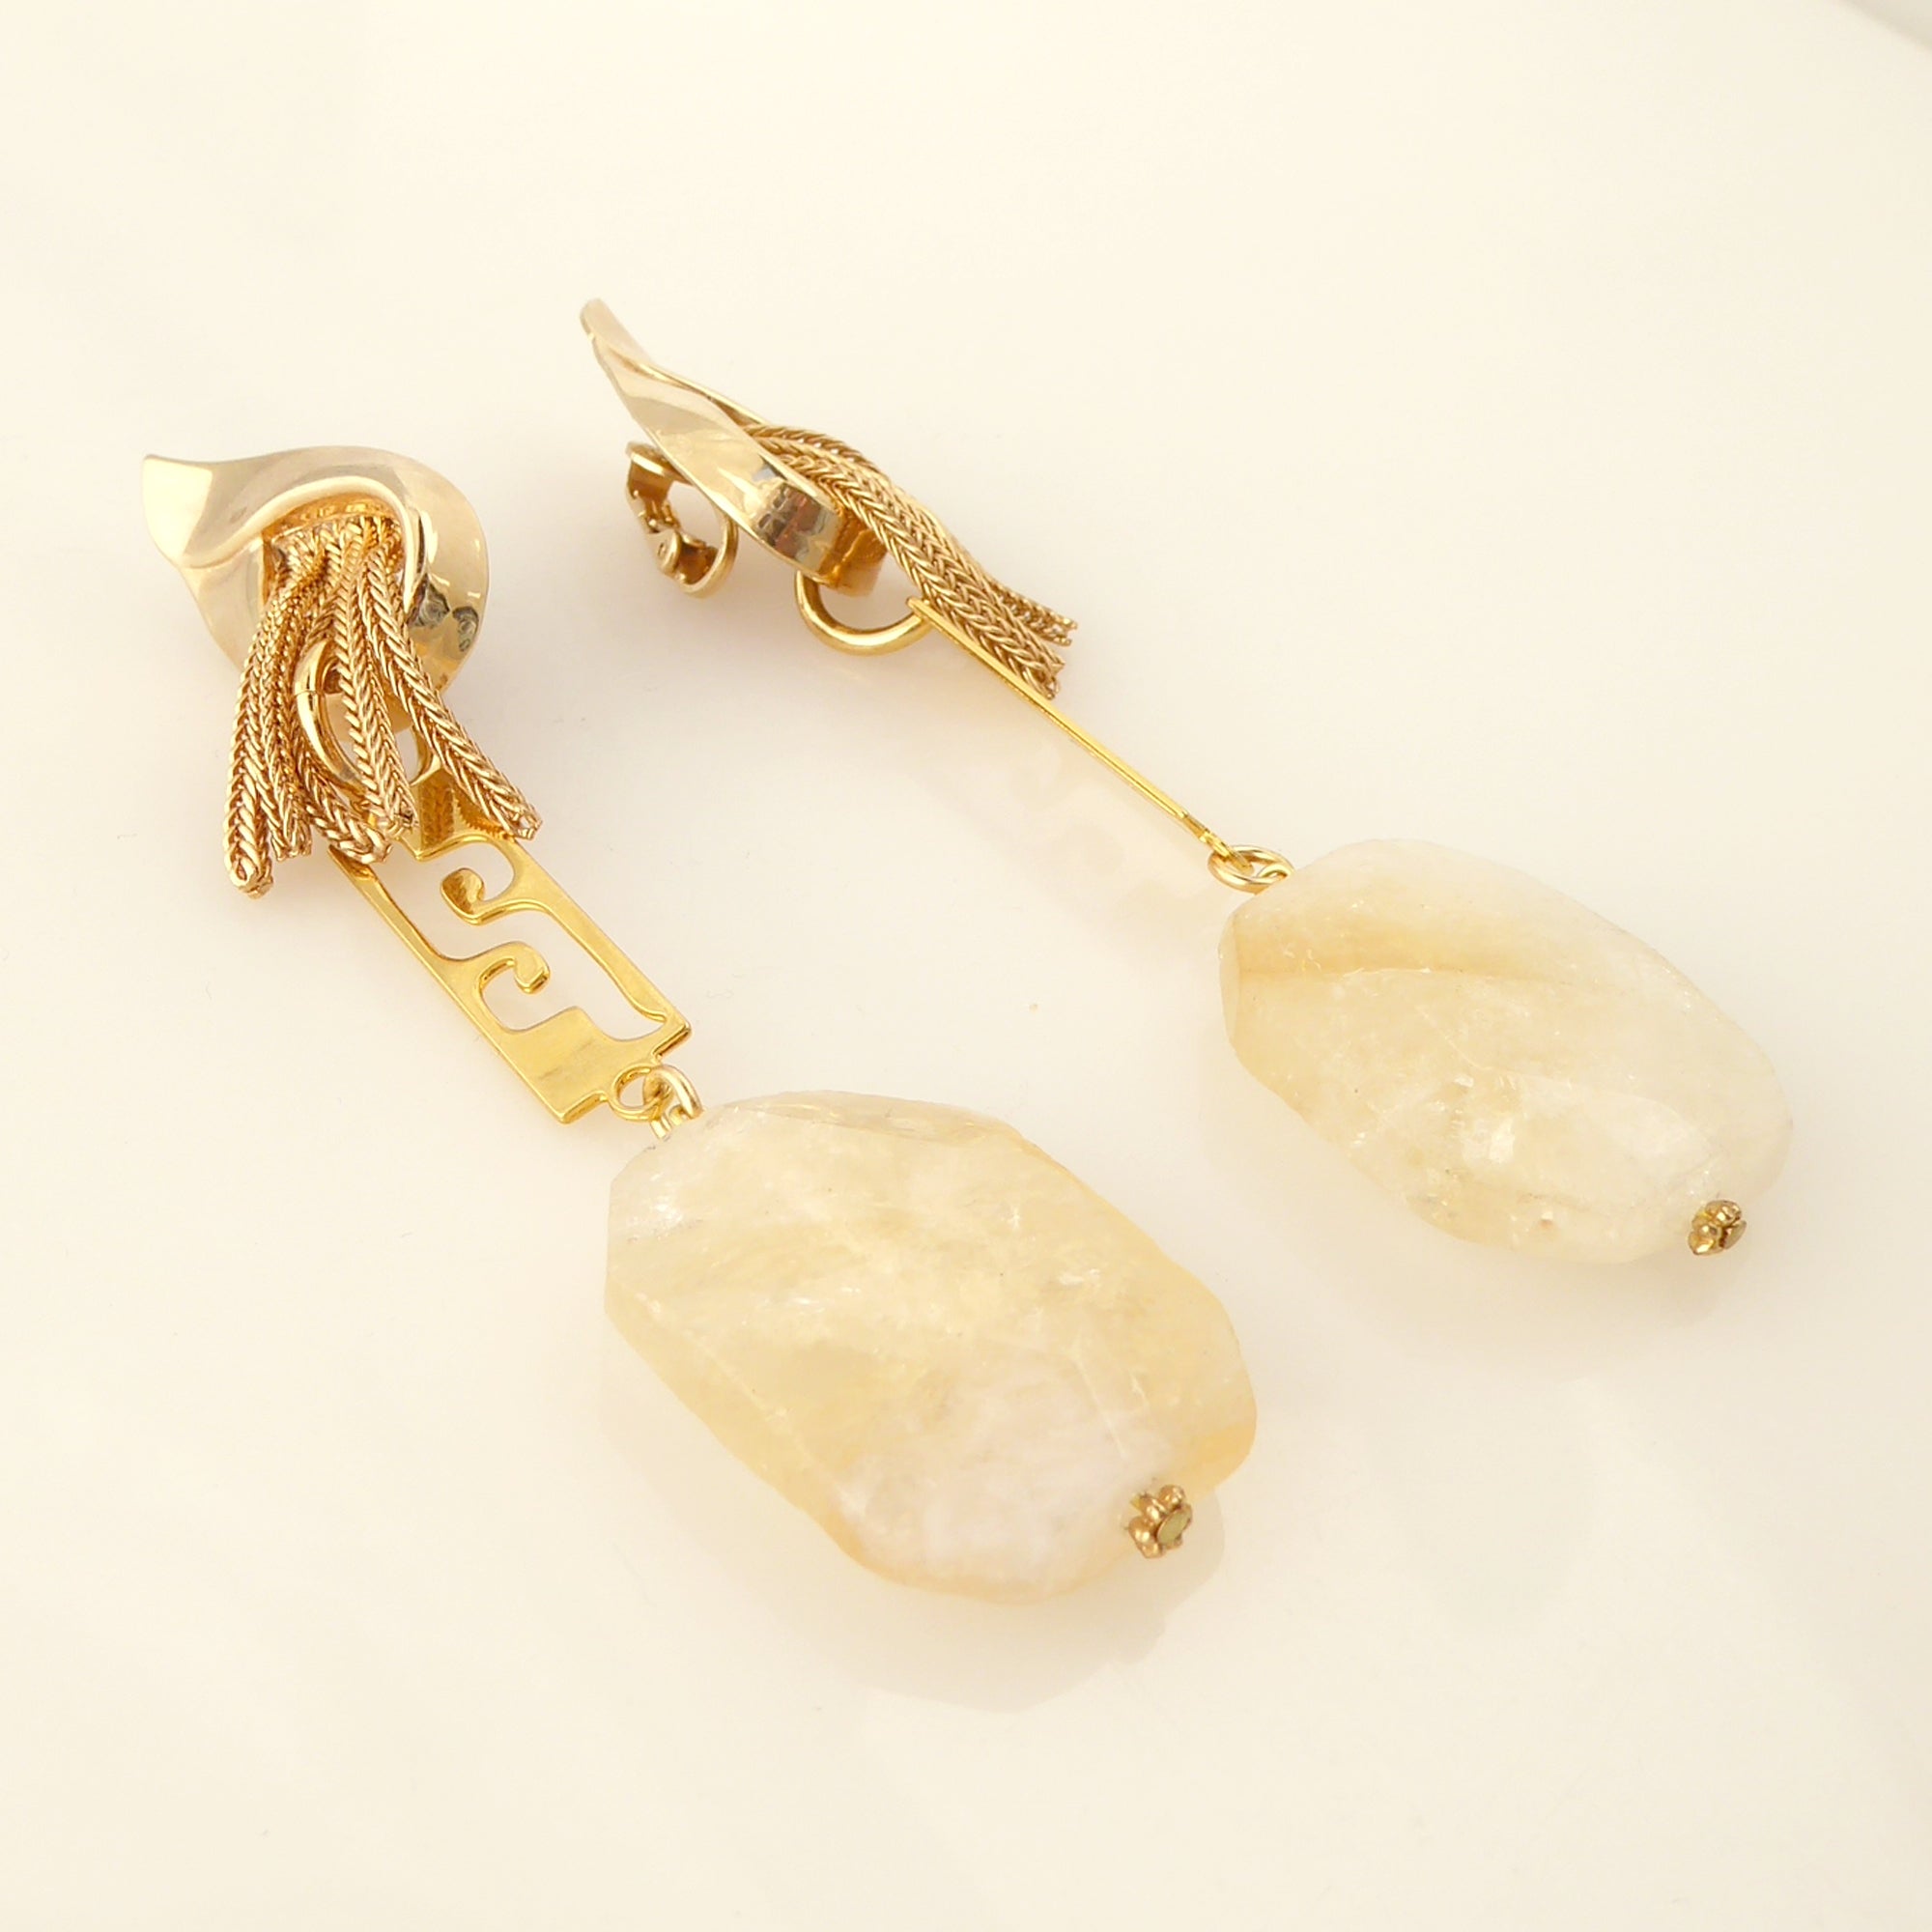 Citrine nugget clip on earrings by Jenny Dayco 2